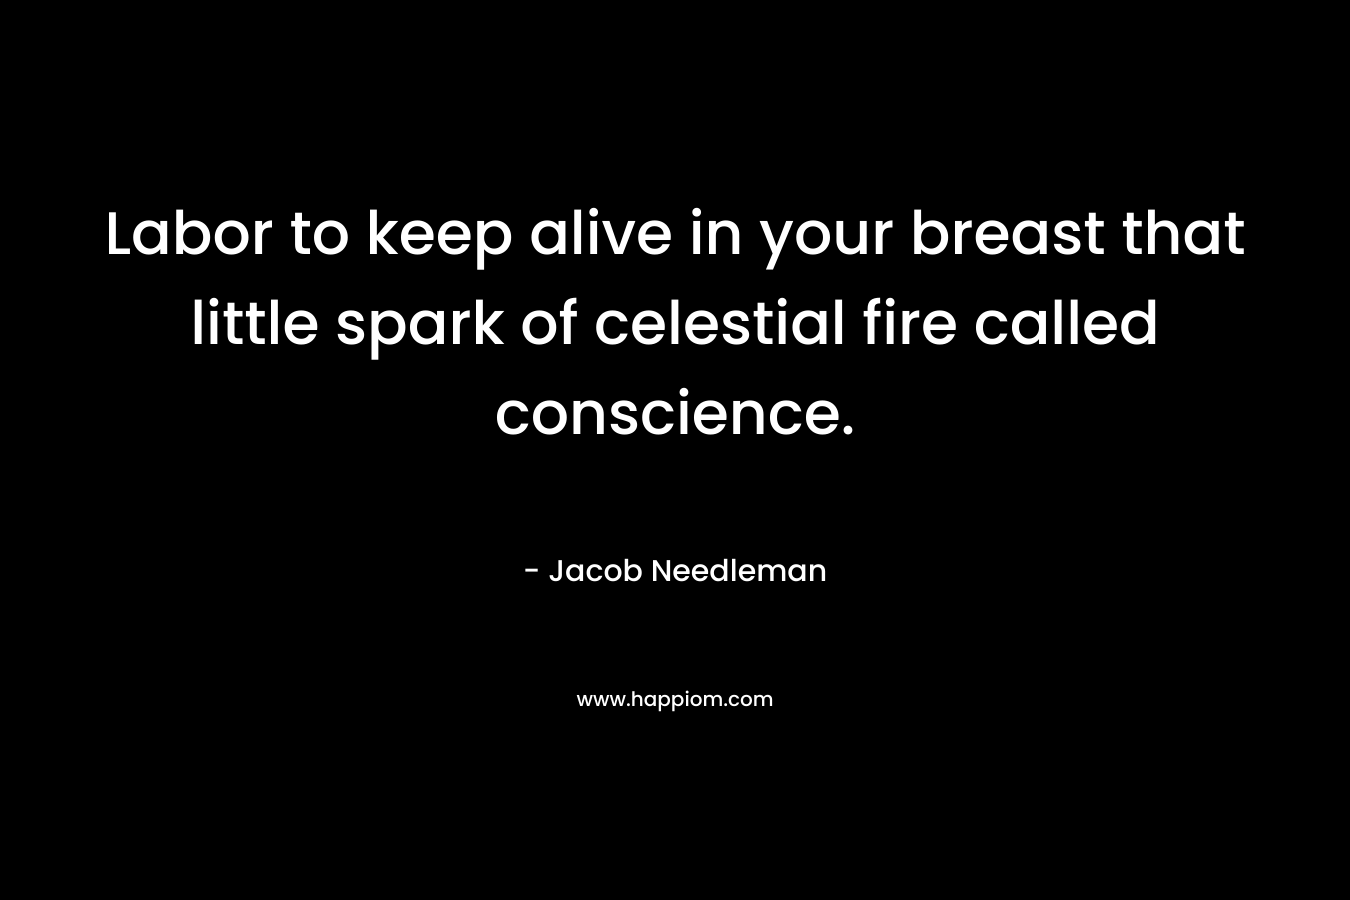 Labor to keep alive in your breast that little spark of celestial fire called conscience.